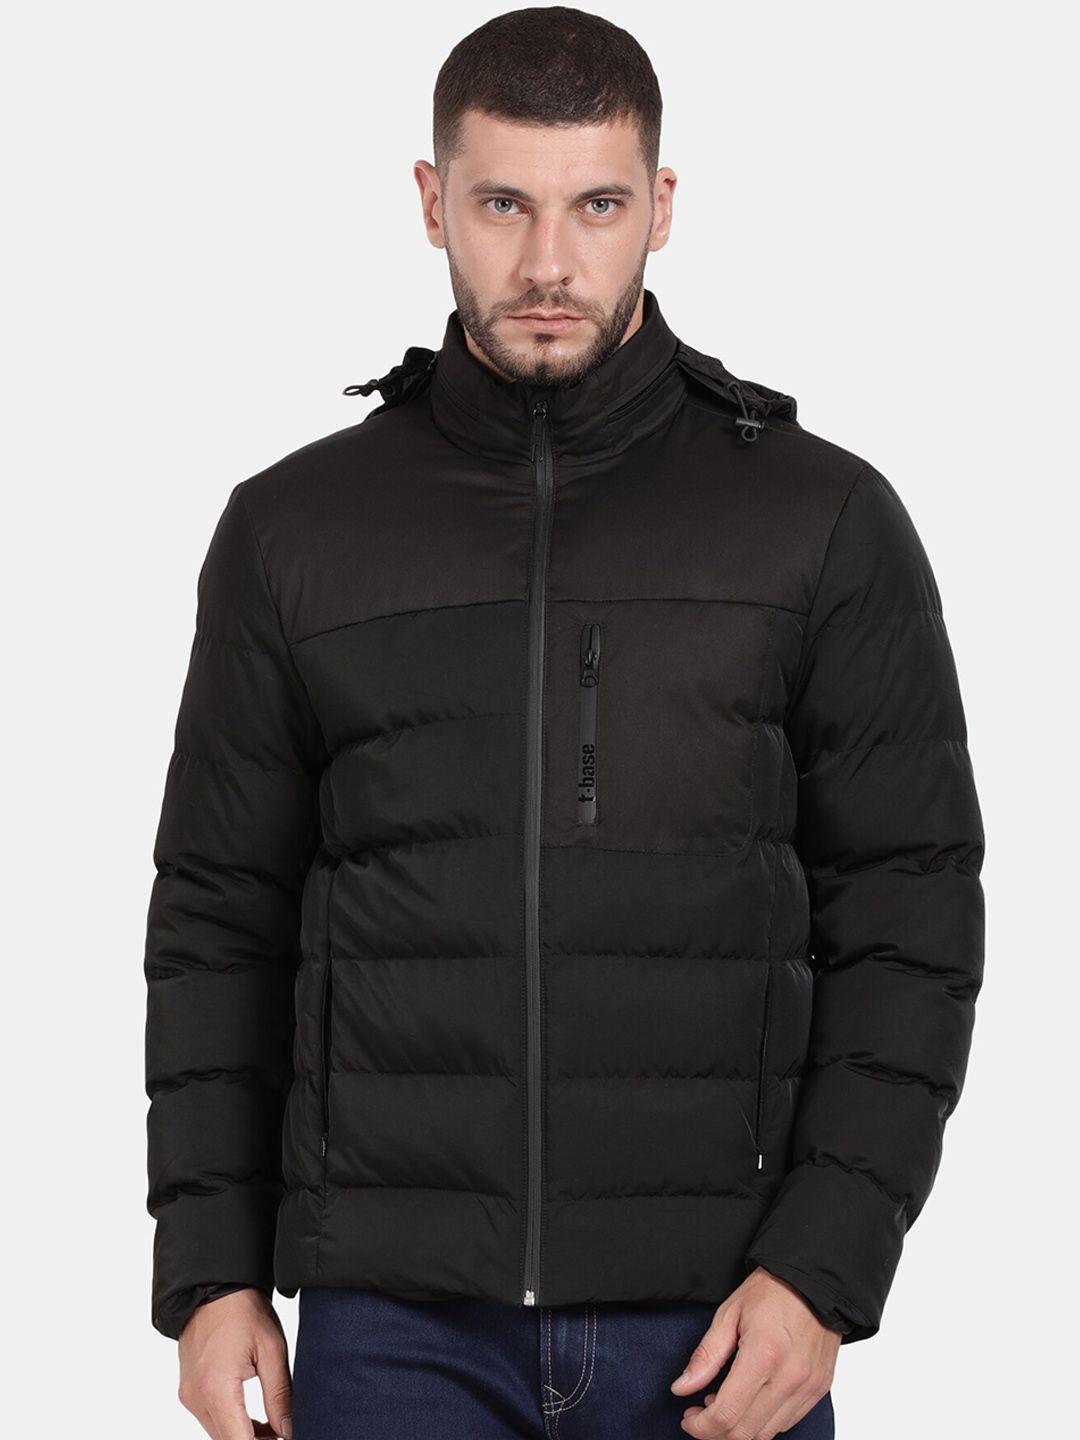 t-base mock collar with detachable hooded insulator puffer jacket